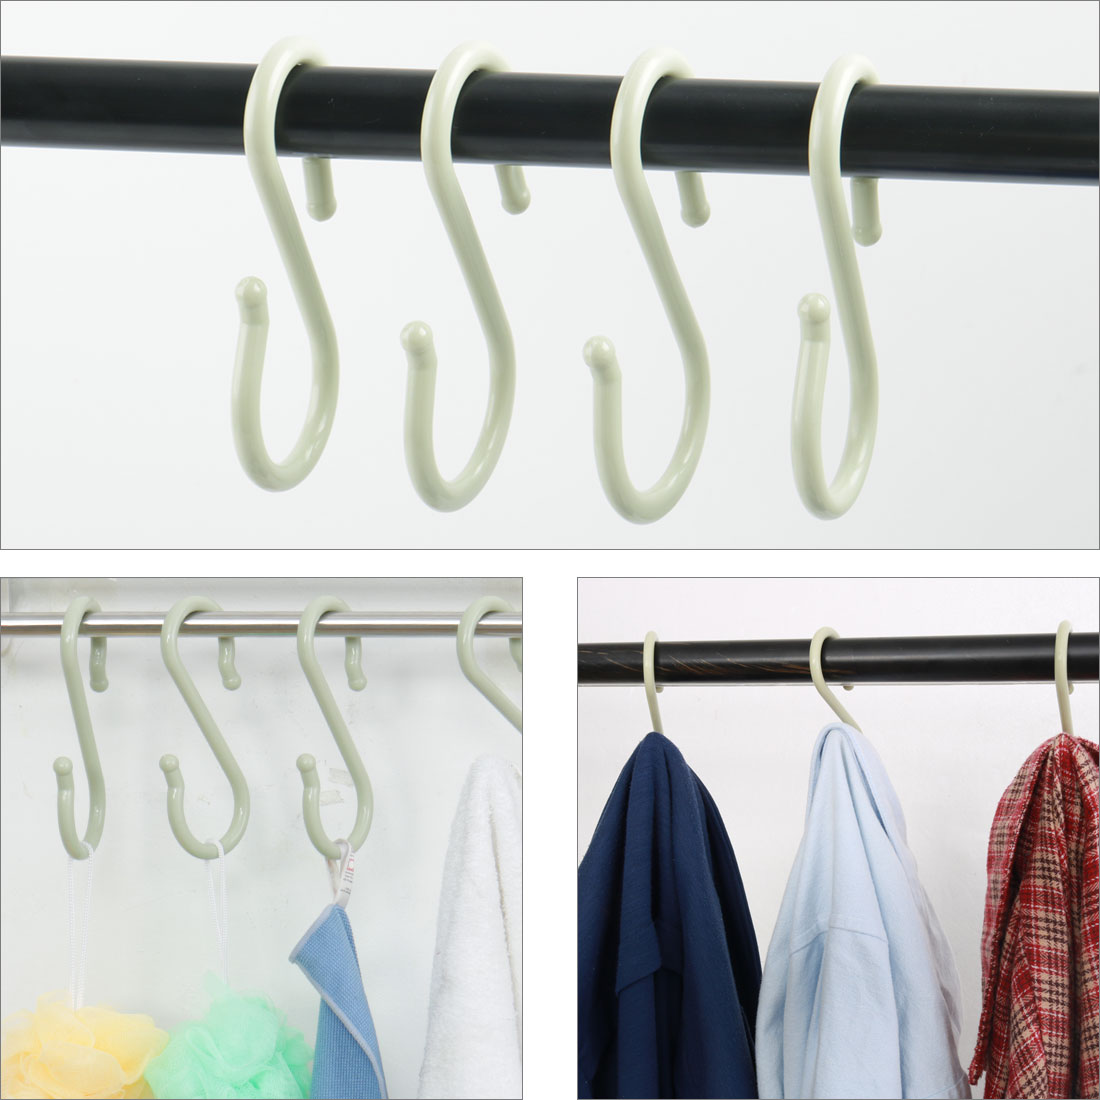 Uxcell 12 Pack S Shape Hooks Plastic Hangers Bedroom Kitchen Bathroom for Pots and Pans Cups Cloth Hanging Light Green - image 3 of 7